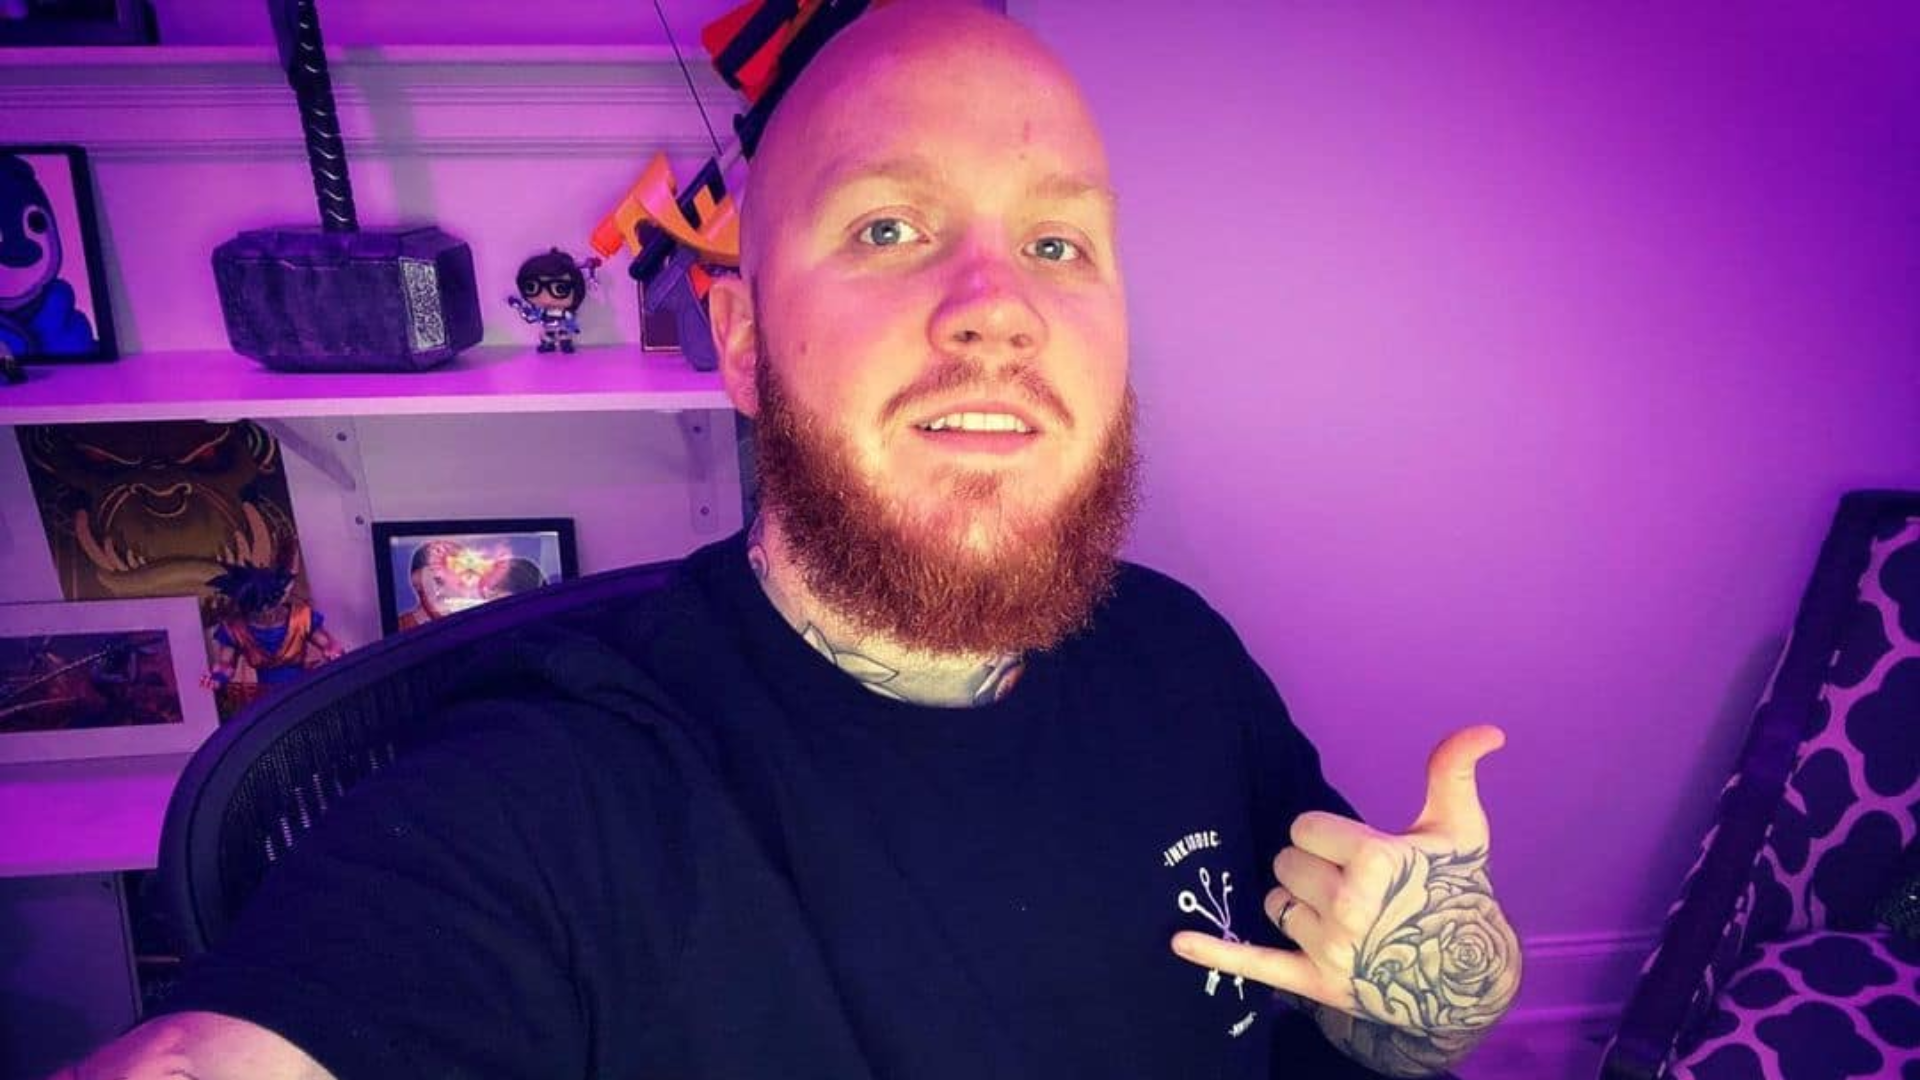 Timthetatman on YouTube: Call of Duty streamer makes small Twitch streamer cry with his heartwarming act of generosity